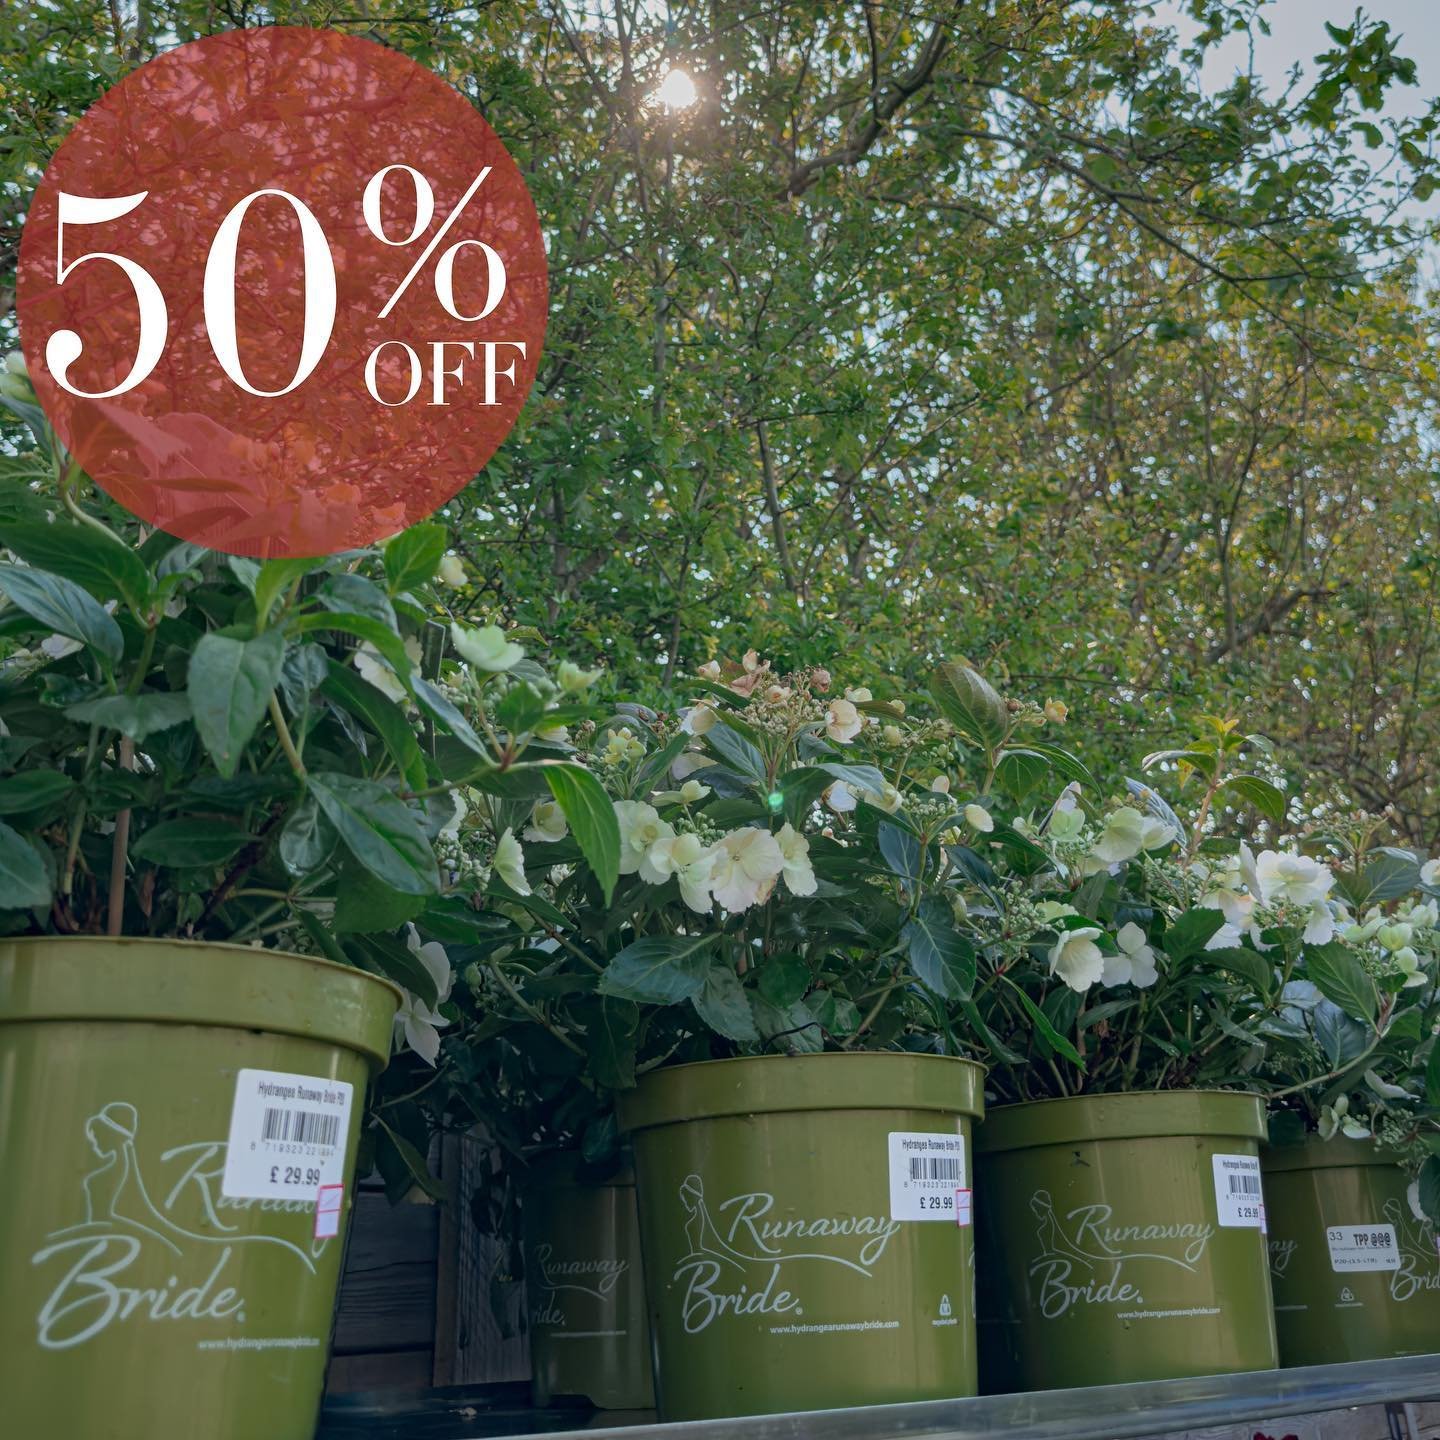 Sun&rsquo;s Out, Savings HUGE! 50% Off Plant Sale☀️

Celebrate the arrival of May with 50% off selected plants! Our team is busy marking down prices, right now, on a variety of selected perennials, shrubs, evergreens and more. 🌿

𝑰𝒎𝒑𝒐𝒓𝒕𝒂𝒏𝒕 